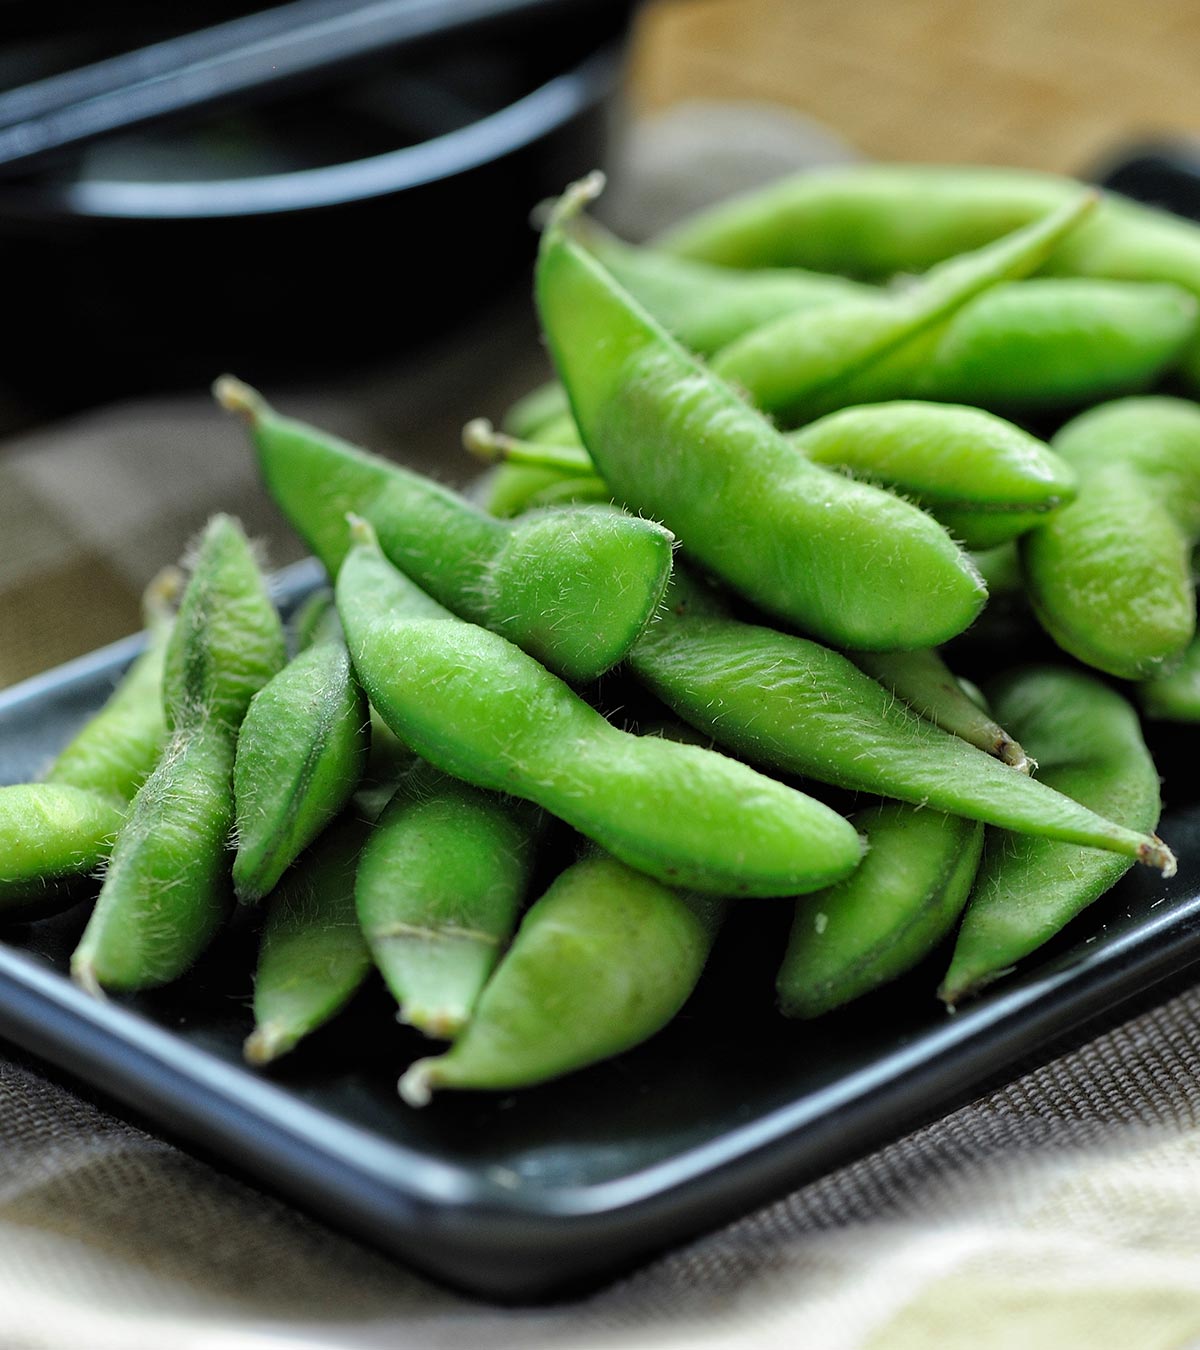 Is It Safe To Eat Edamame During Pregnancy?